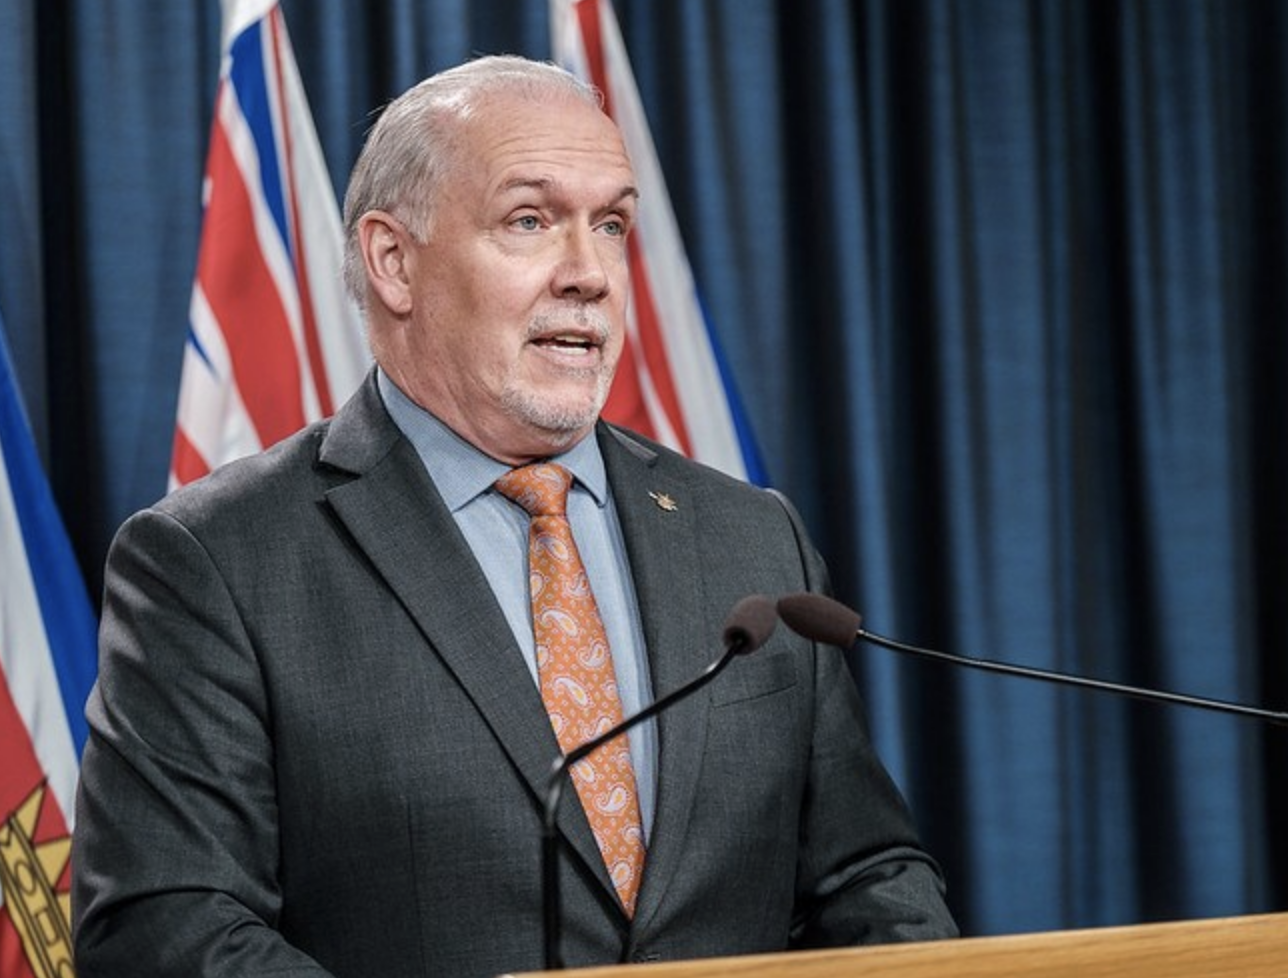 B.C. prepares to safely move to Step 2 of its restart plan